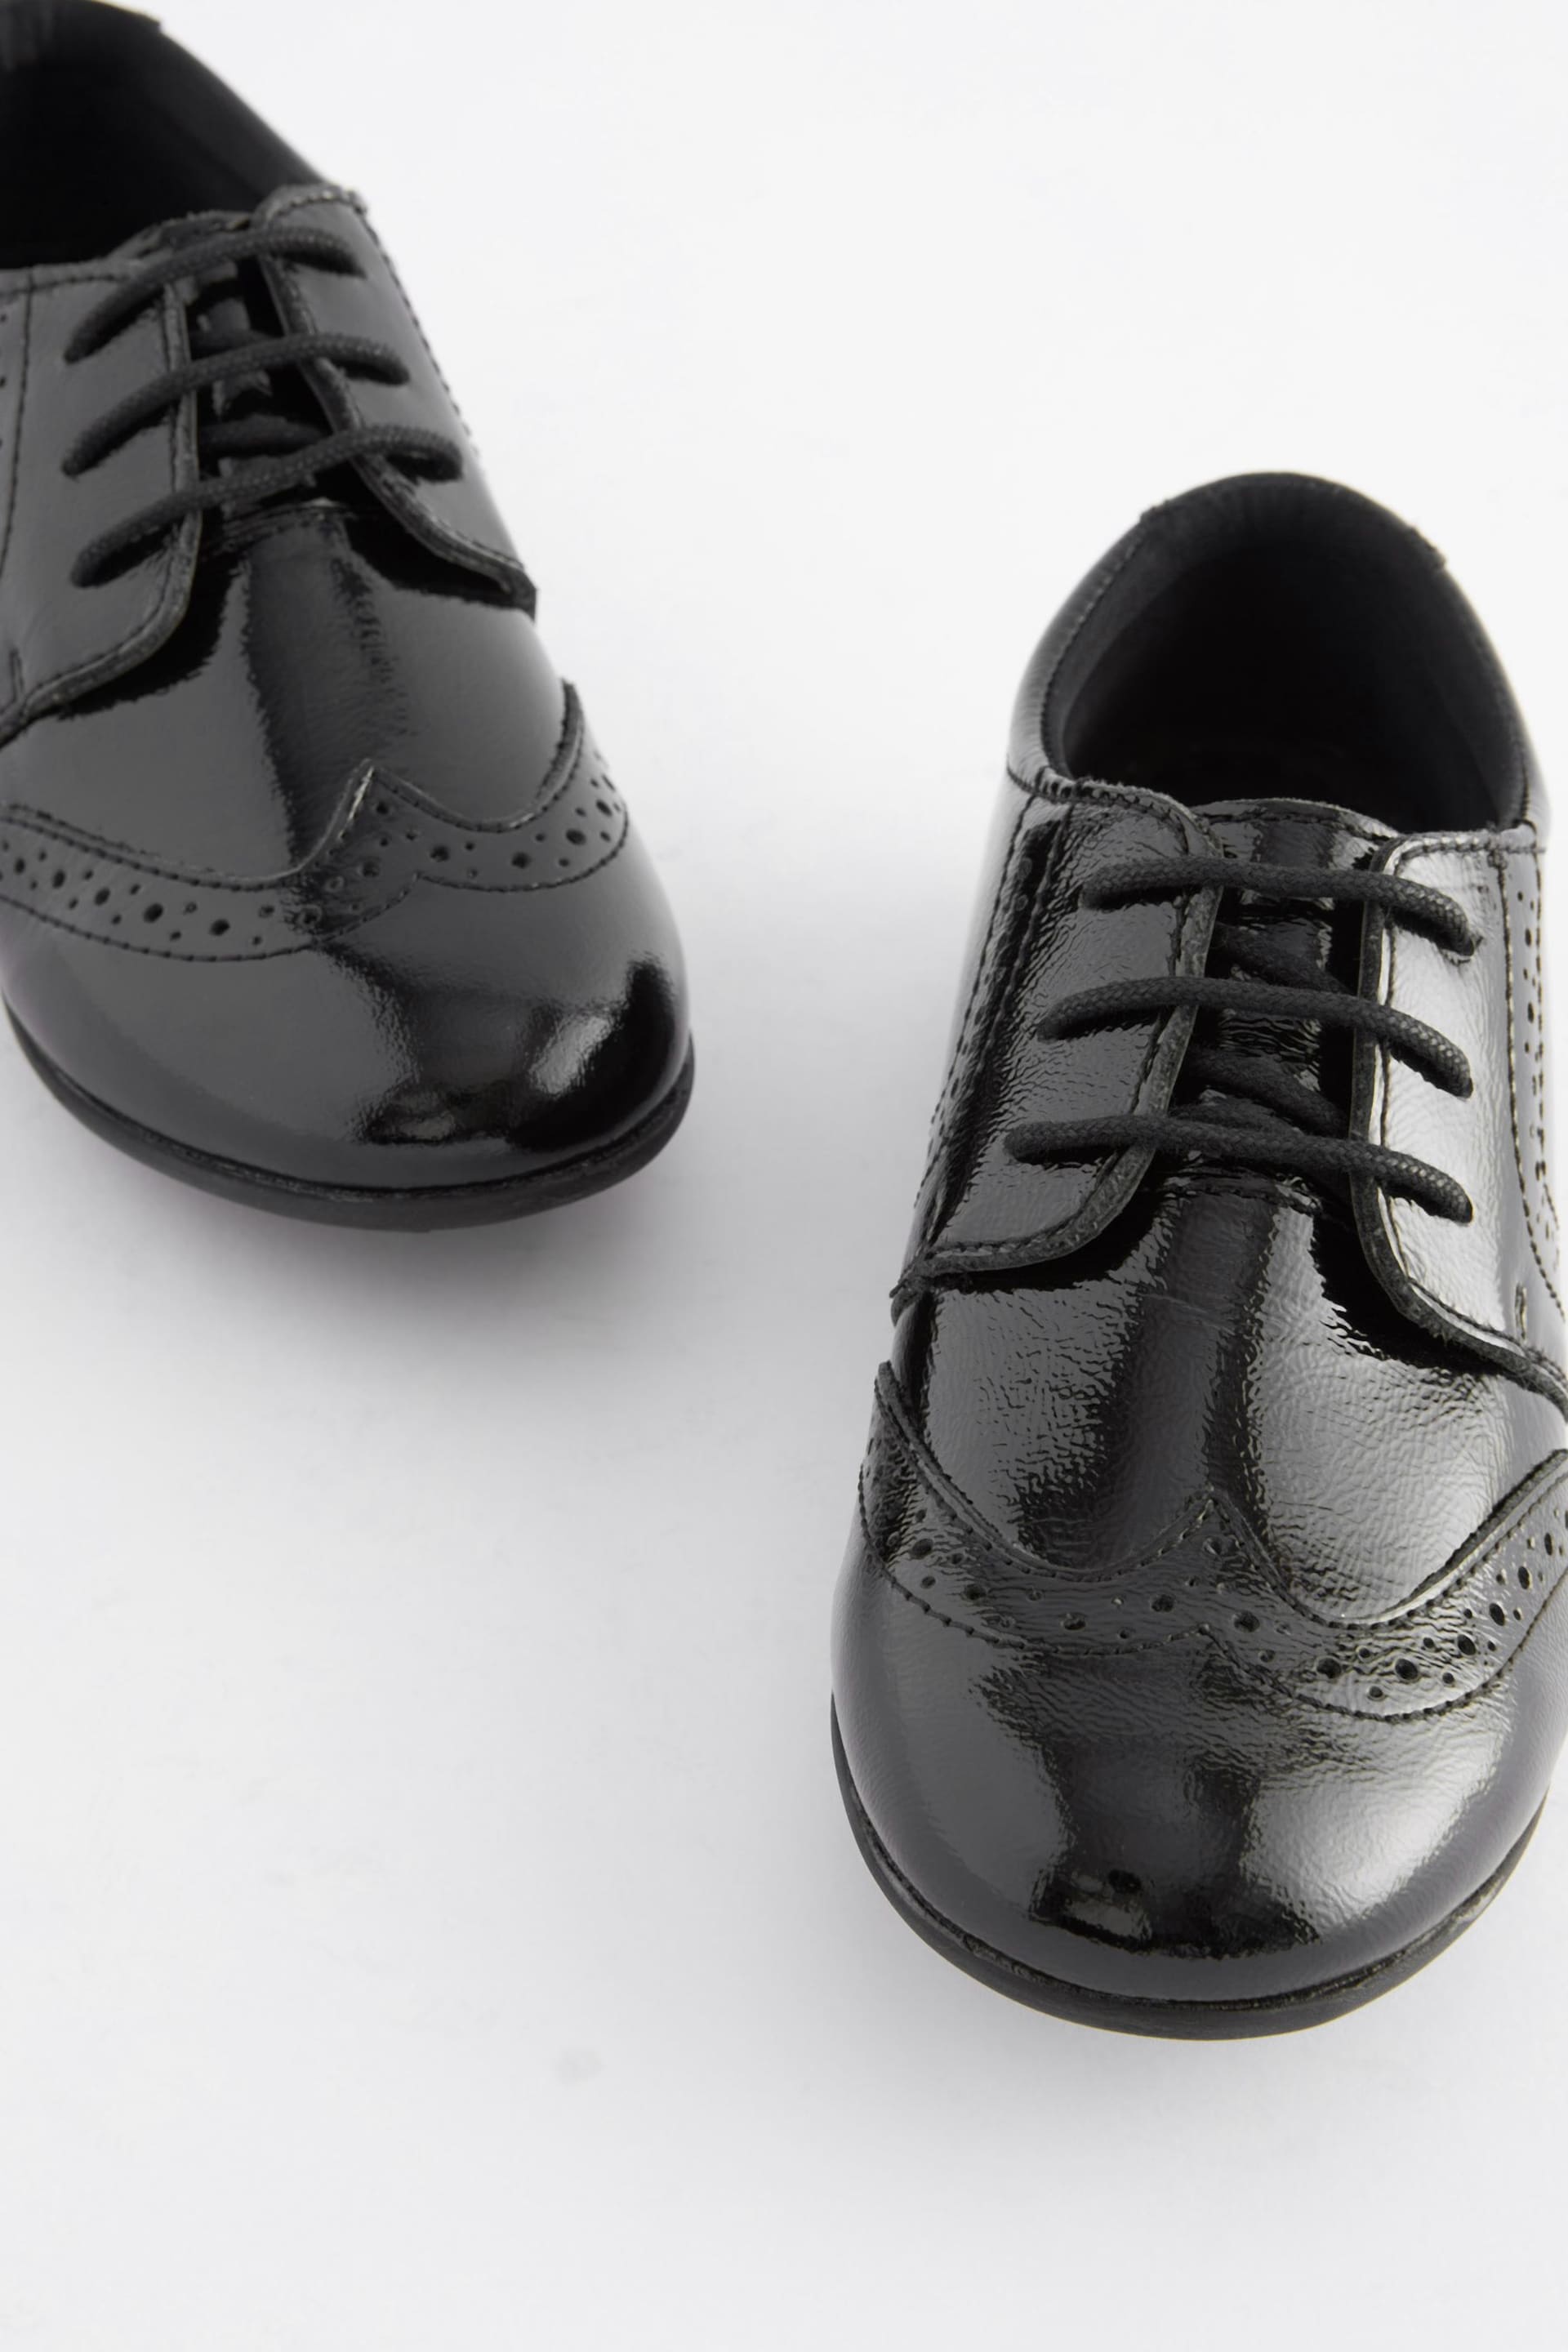 Black Patent Standard Fit (F) School Leather Lace-Up Brogues - Image 8 of 10